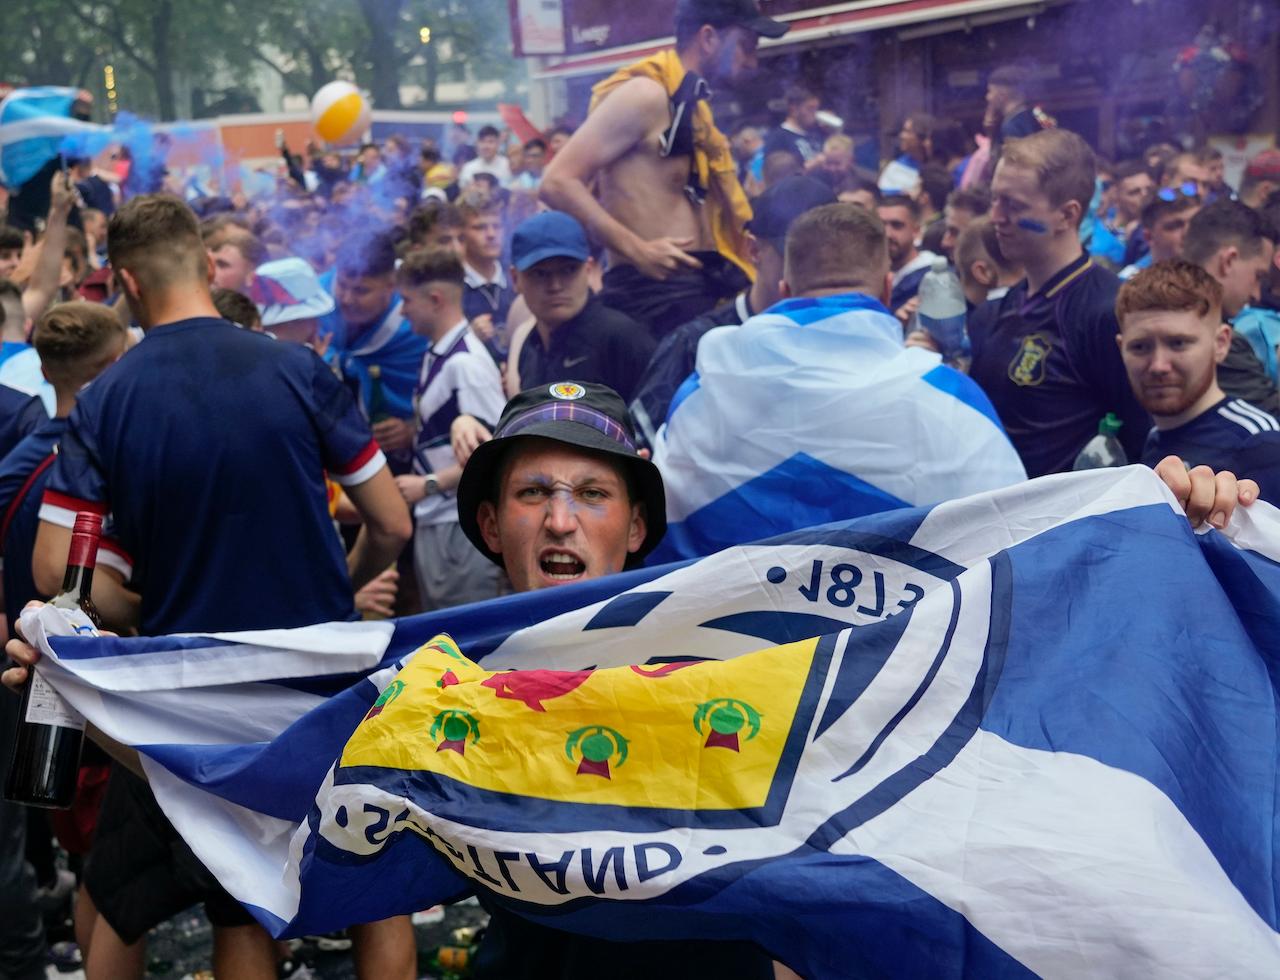 Scotland fans gather in Leicester Square prior to the Euro 2020 football championship group D match between England and Scotland, in London, June 18. Scottish authorities have reported nearly 2,000 coronavirus cases linked to watching European Championship games in stadiums, public gatherings, pubs or private homes. Photo: AP